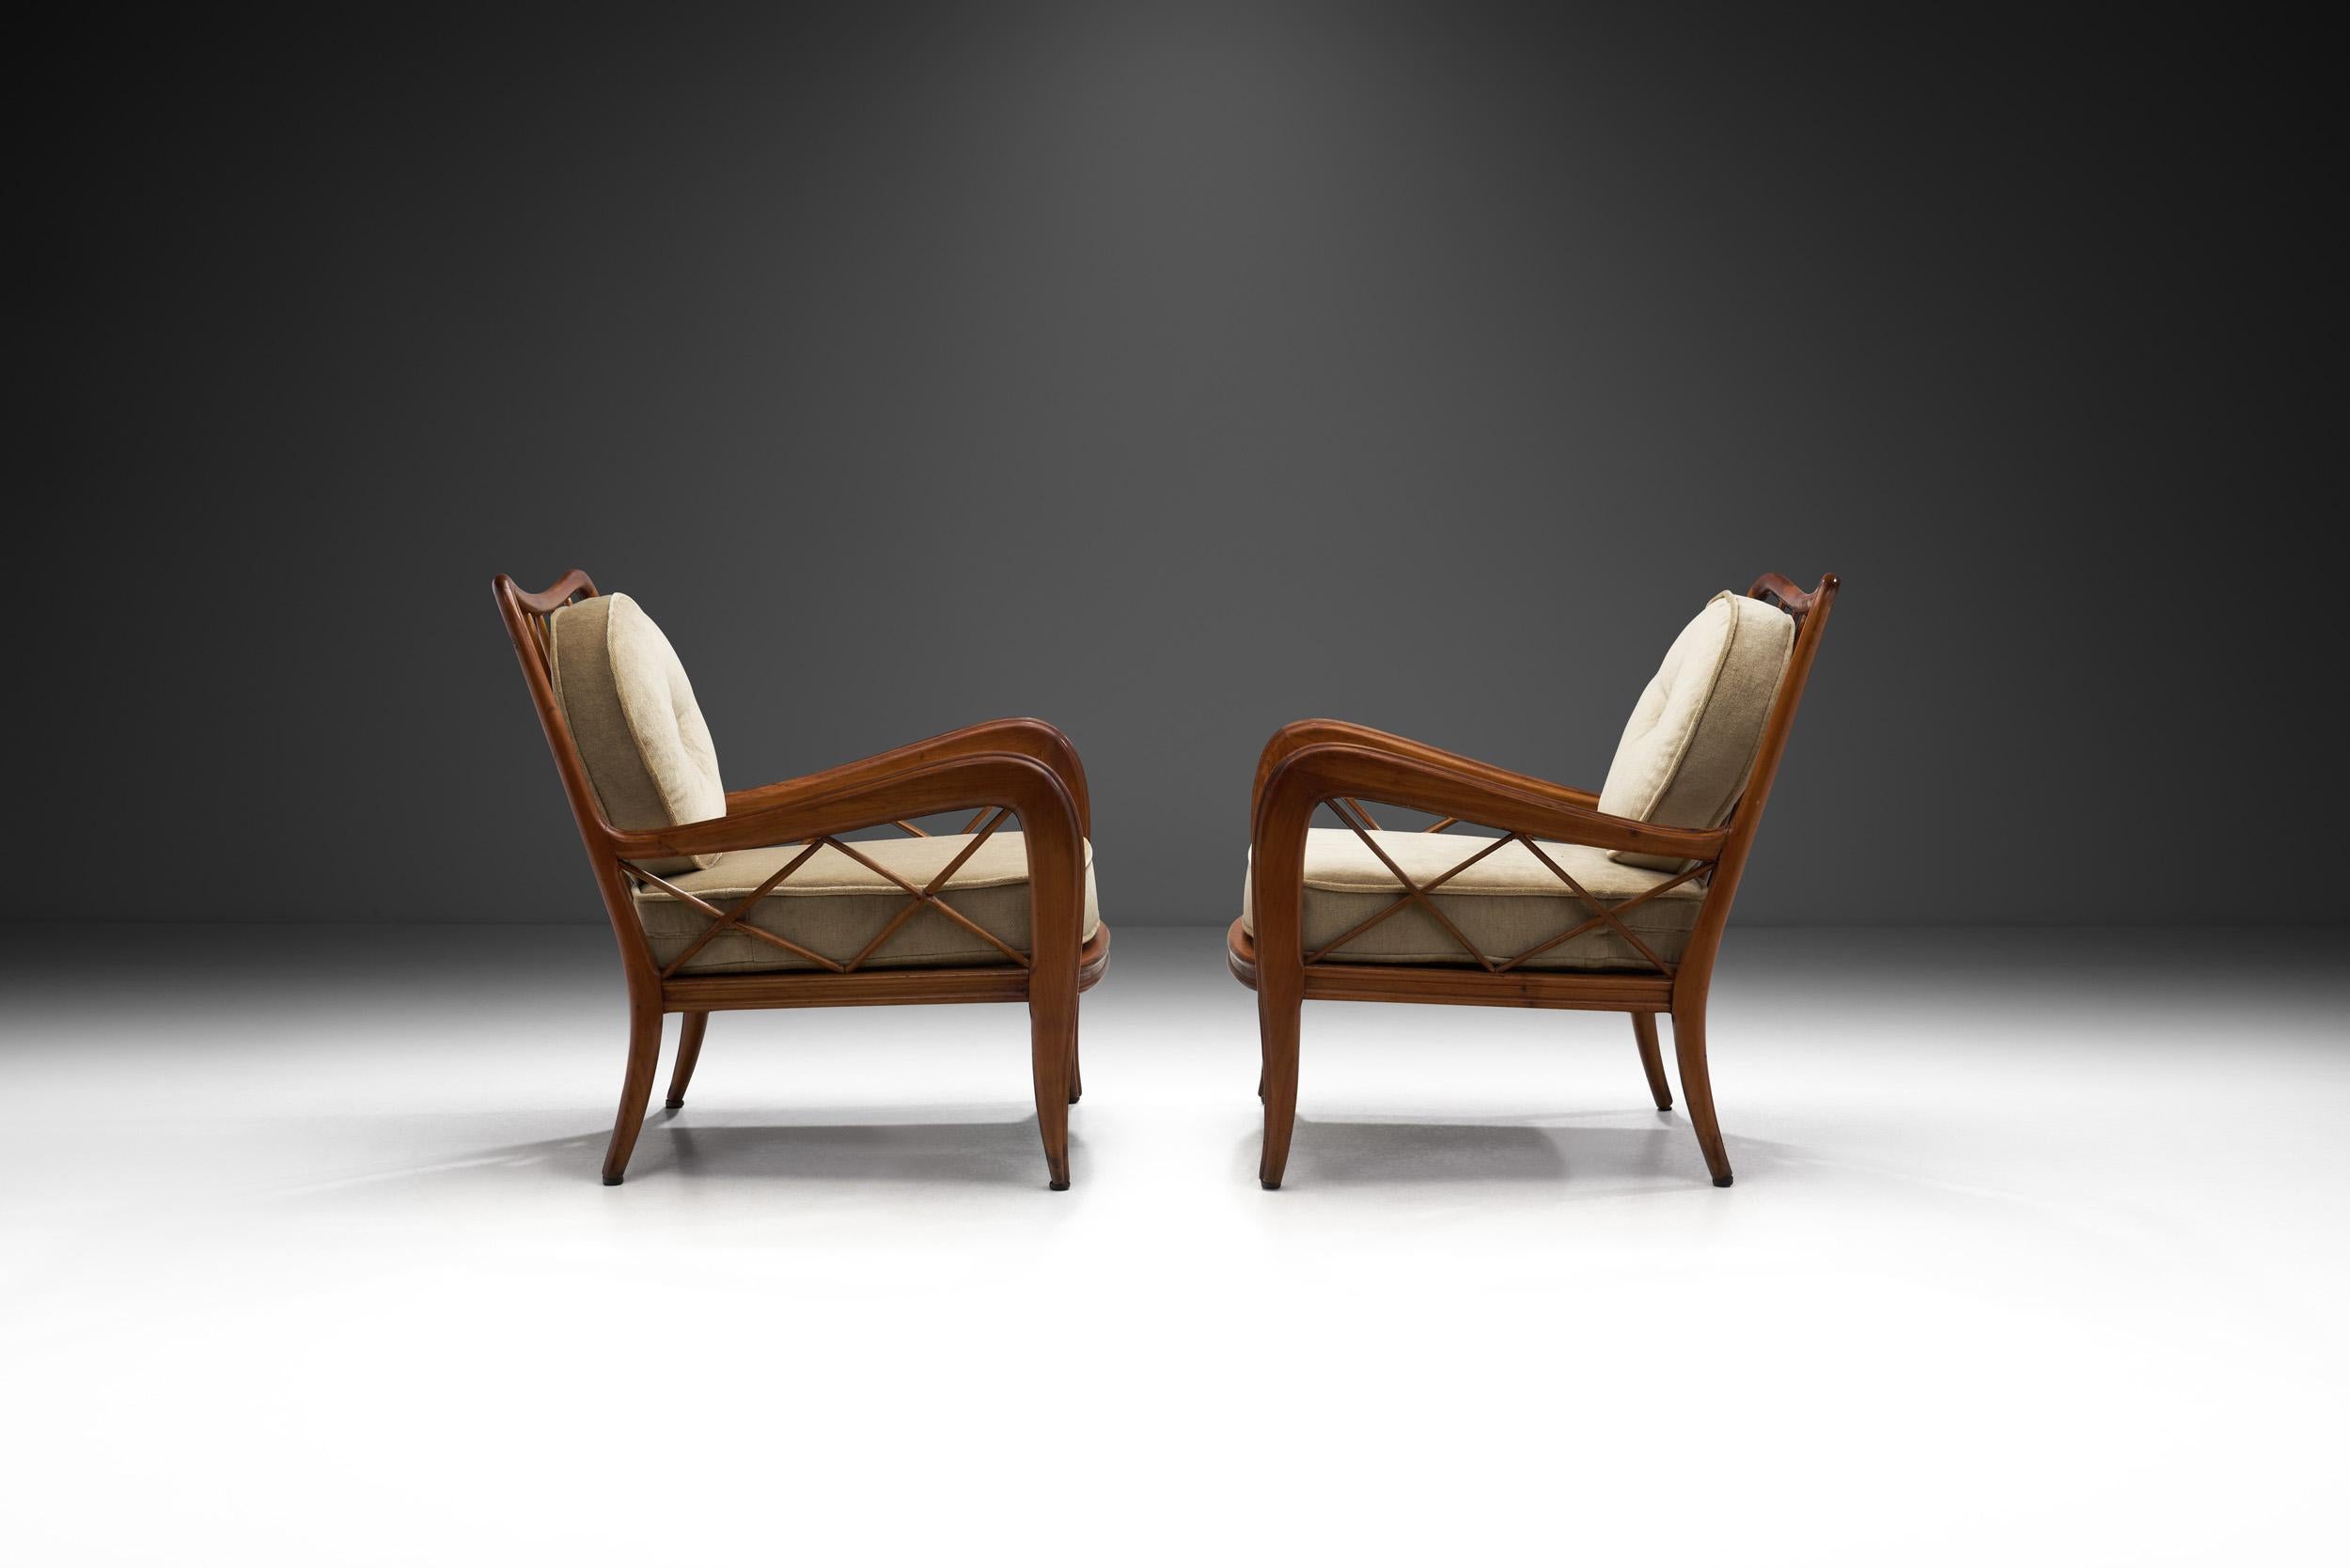 Mid-20th Century Italian Modern Lounge Chairs Attributed to Paolo Buffa, Italy 1940s